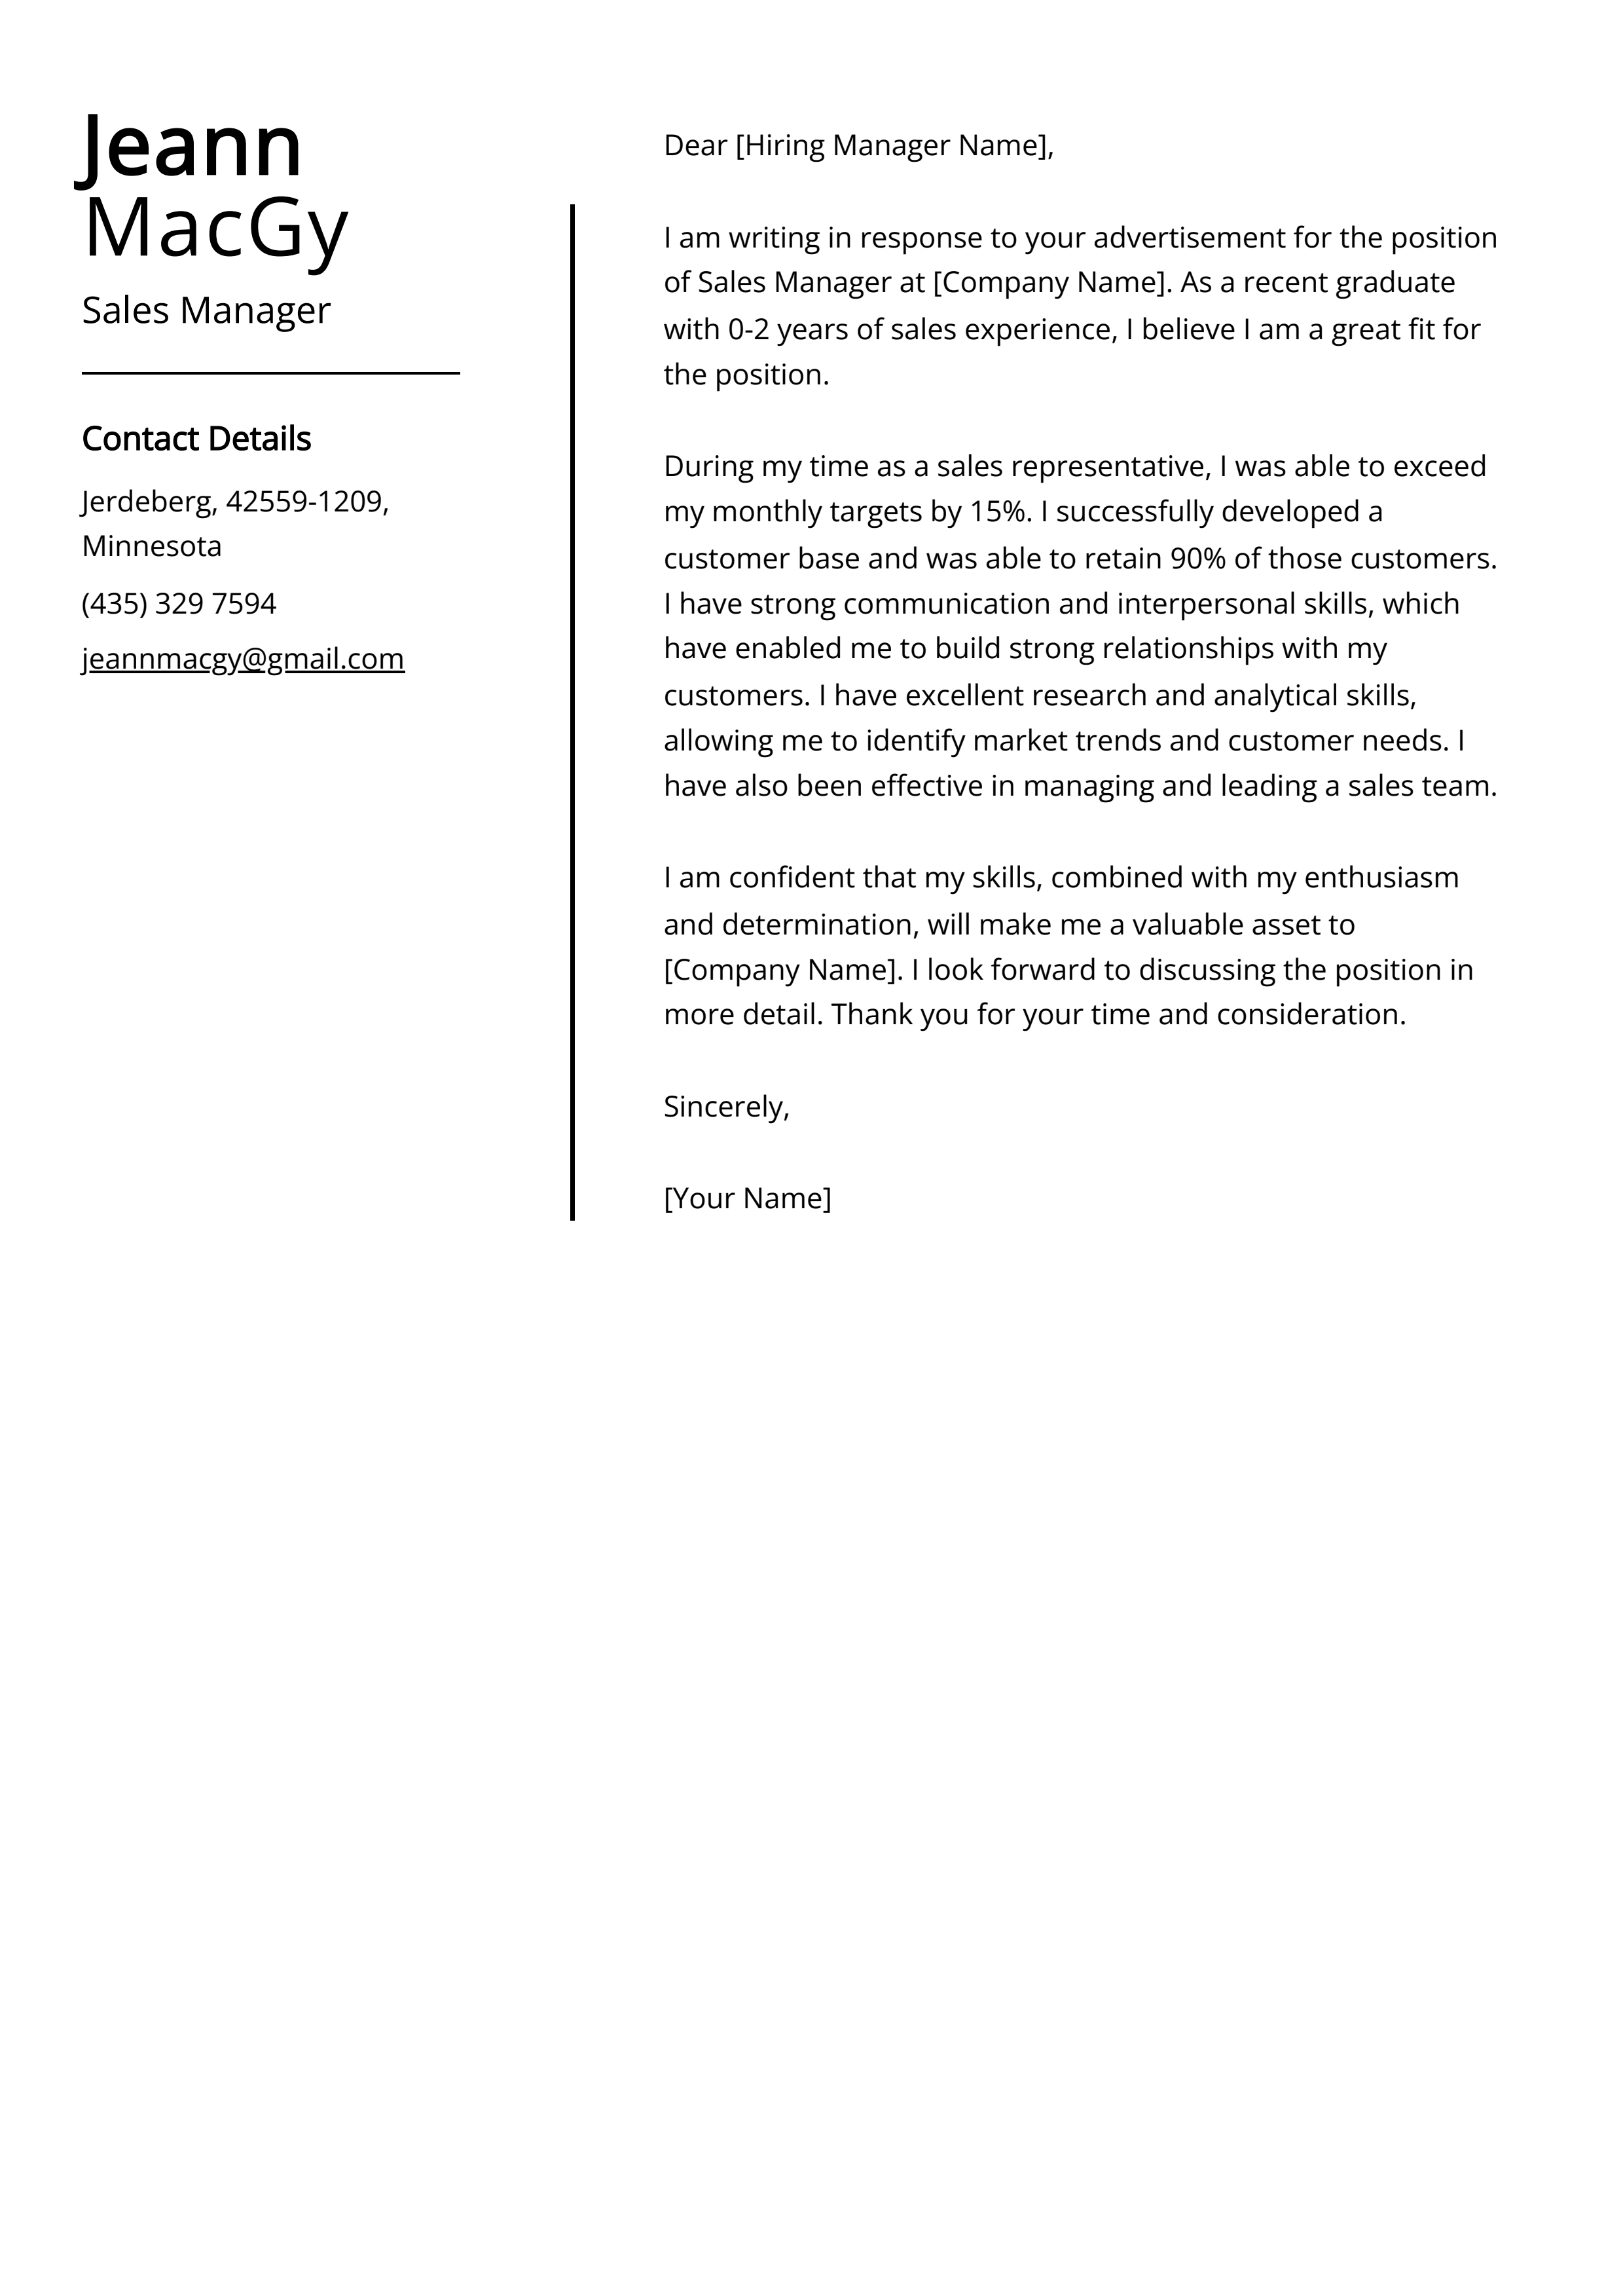 Sales Manager Cover Letter Example